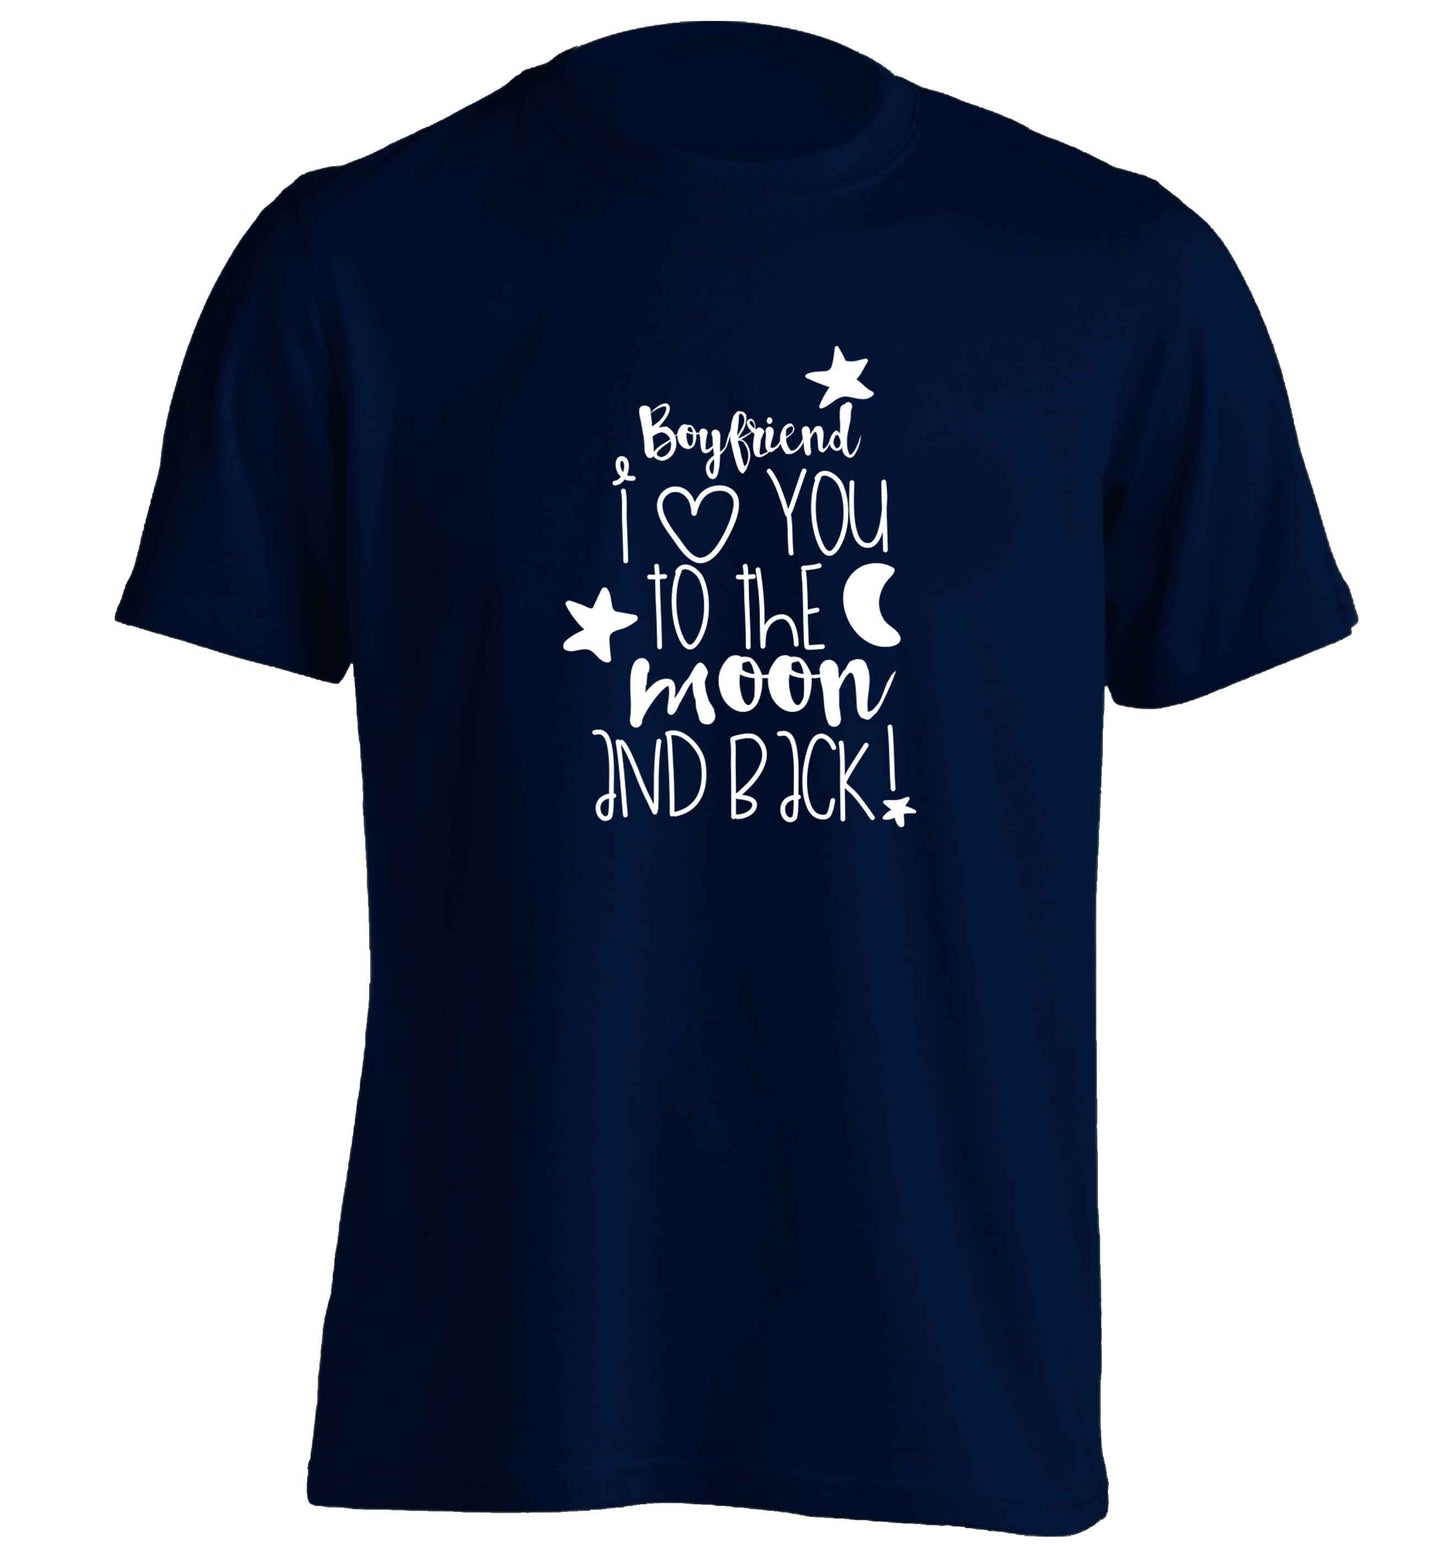 Boyfriend I love you to the moon and back adults unisex navy Tshirt 2XL